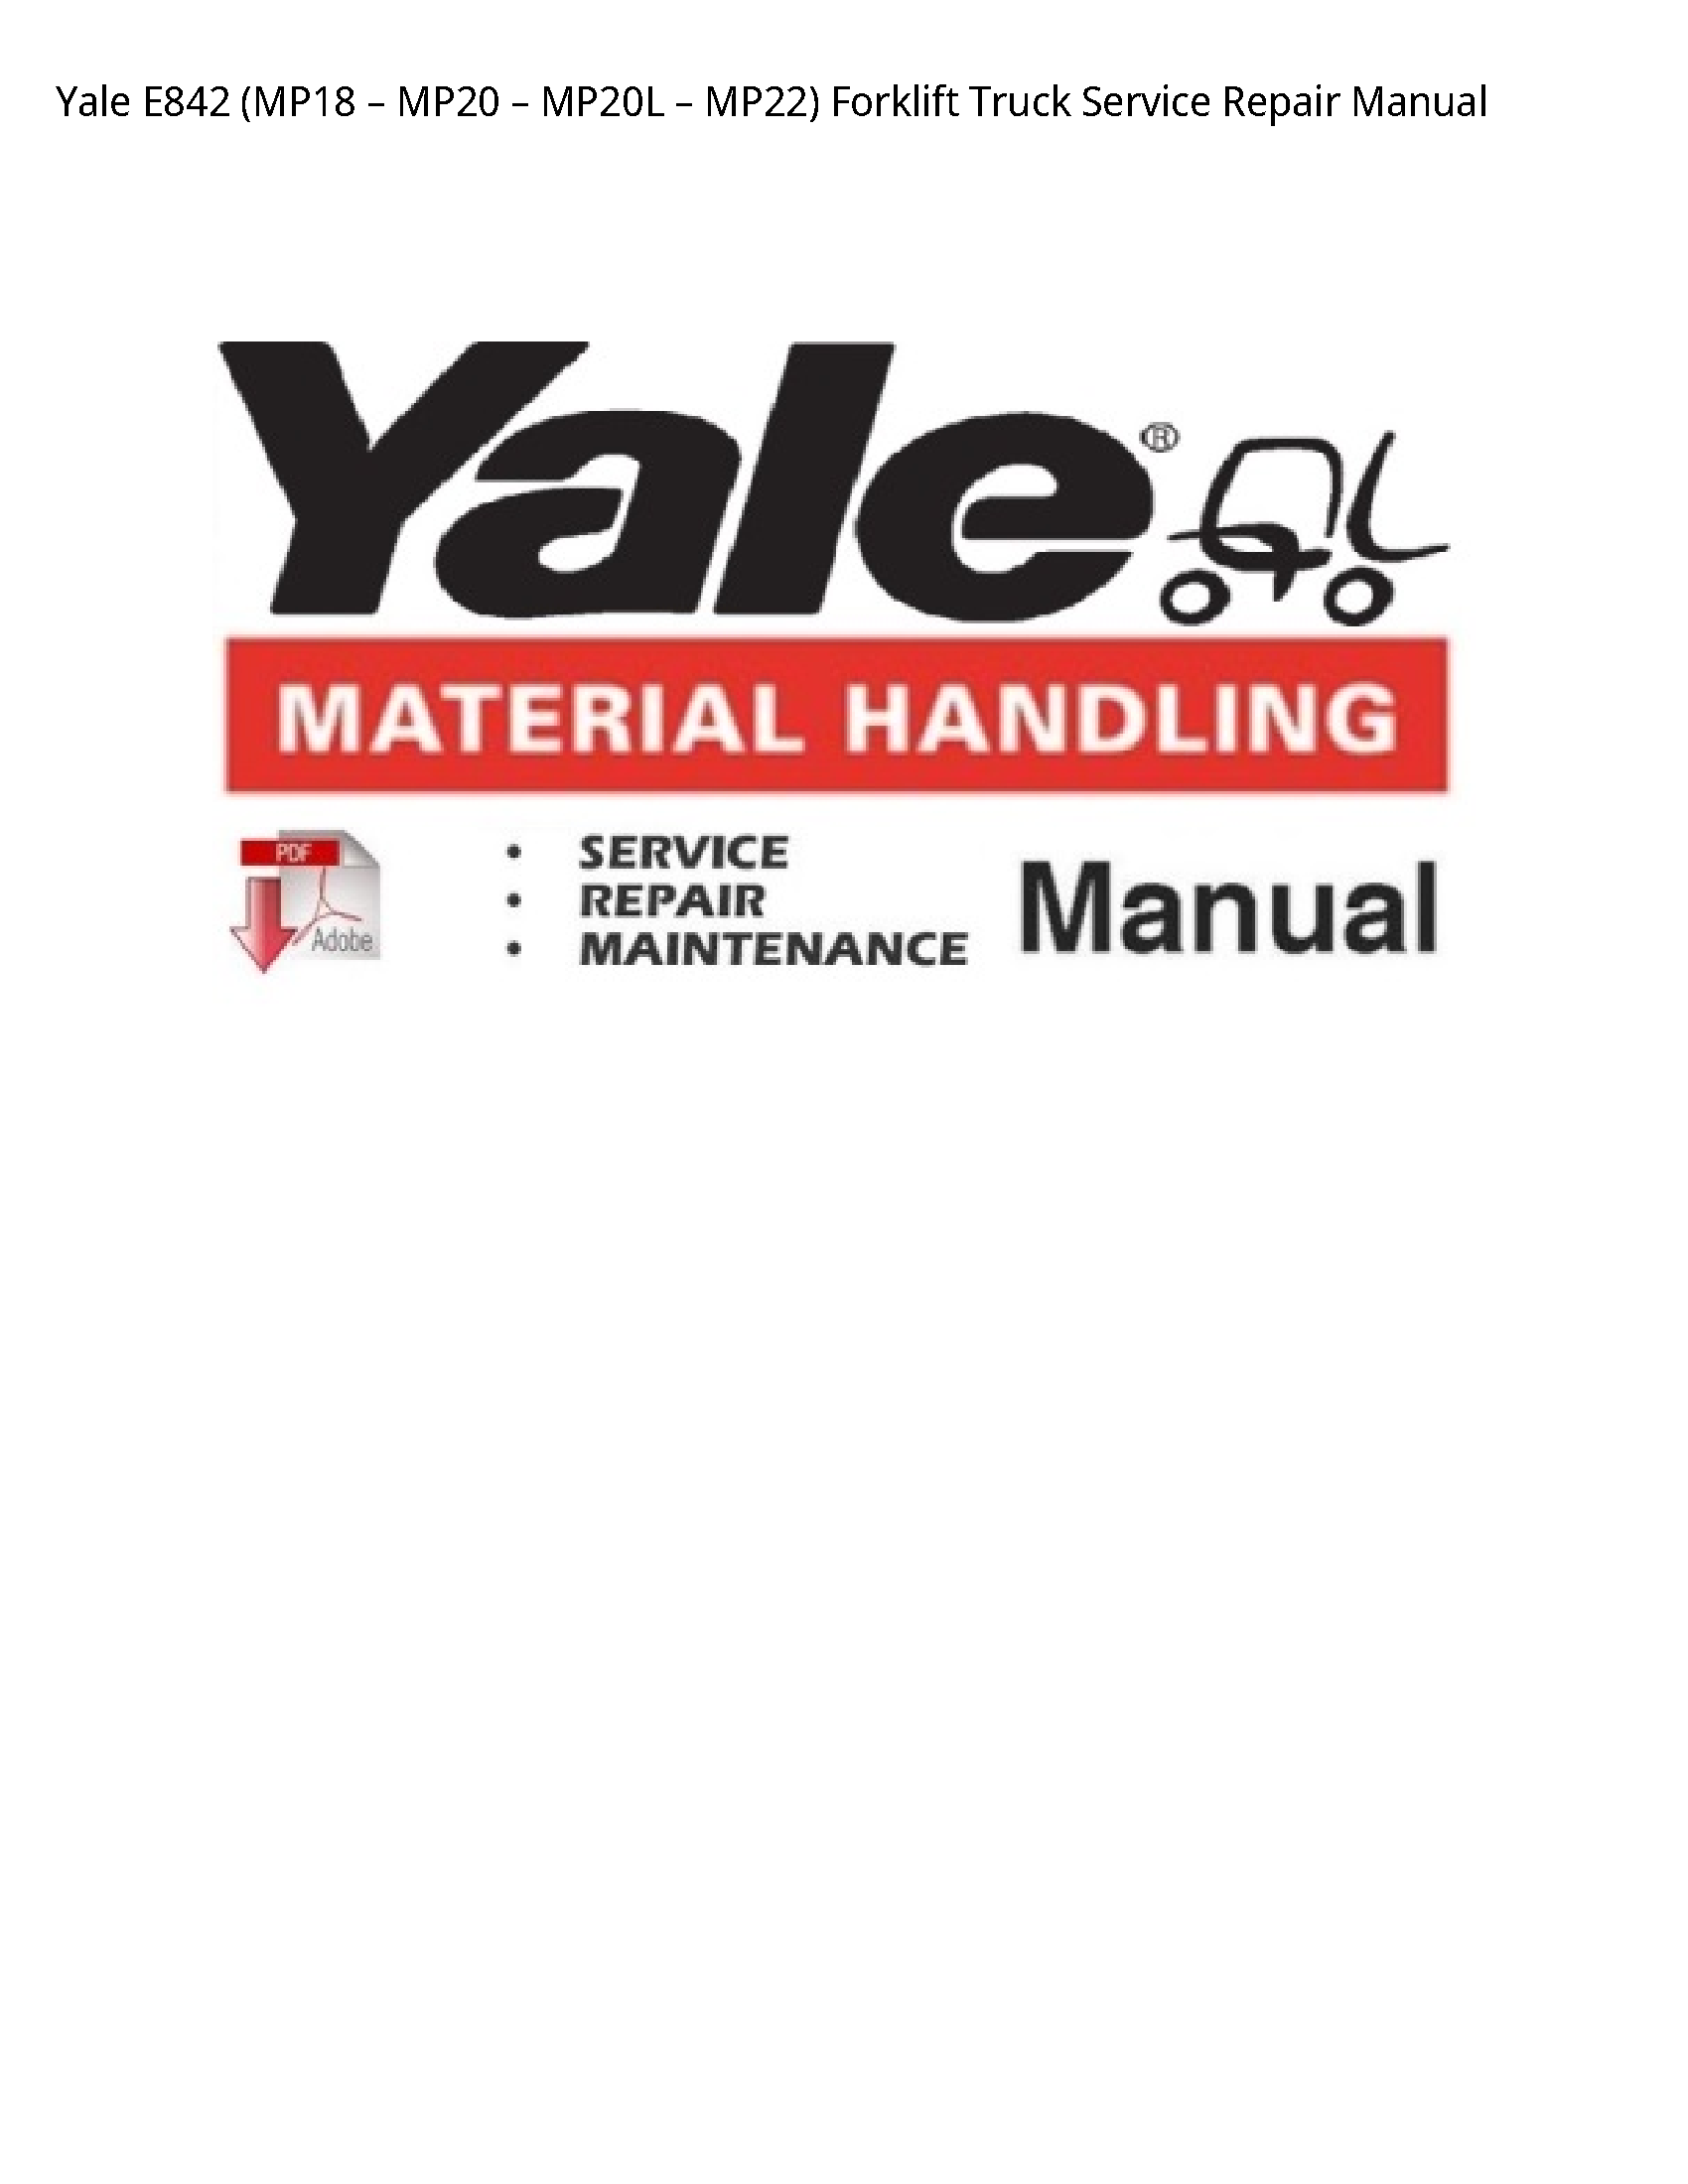 Yale E842 Forklift Truck manual